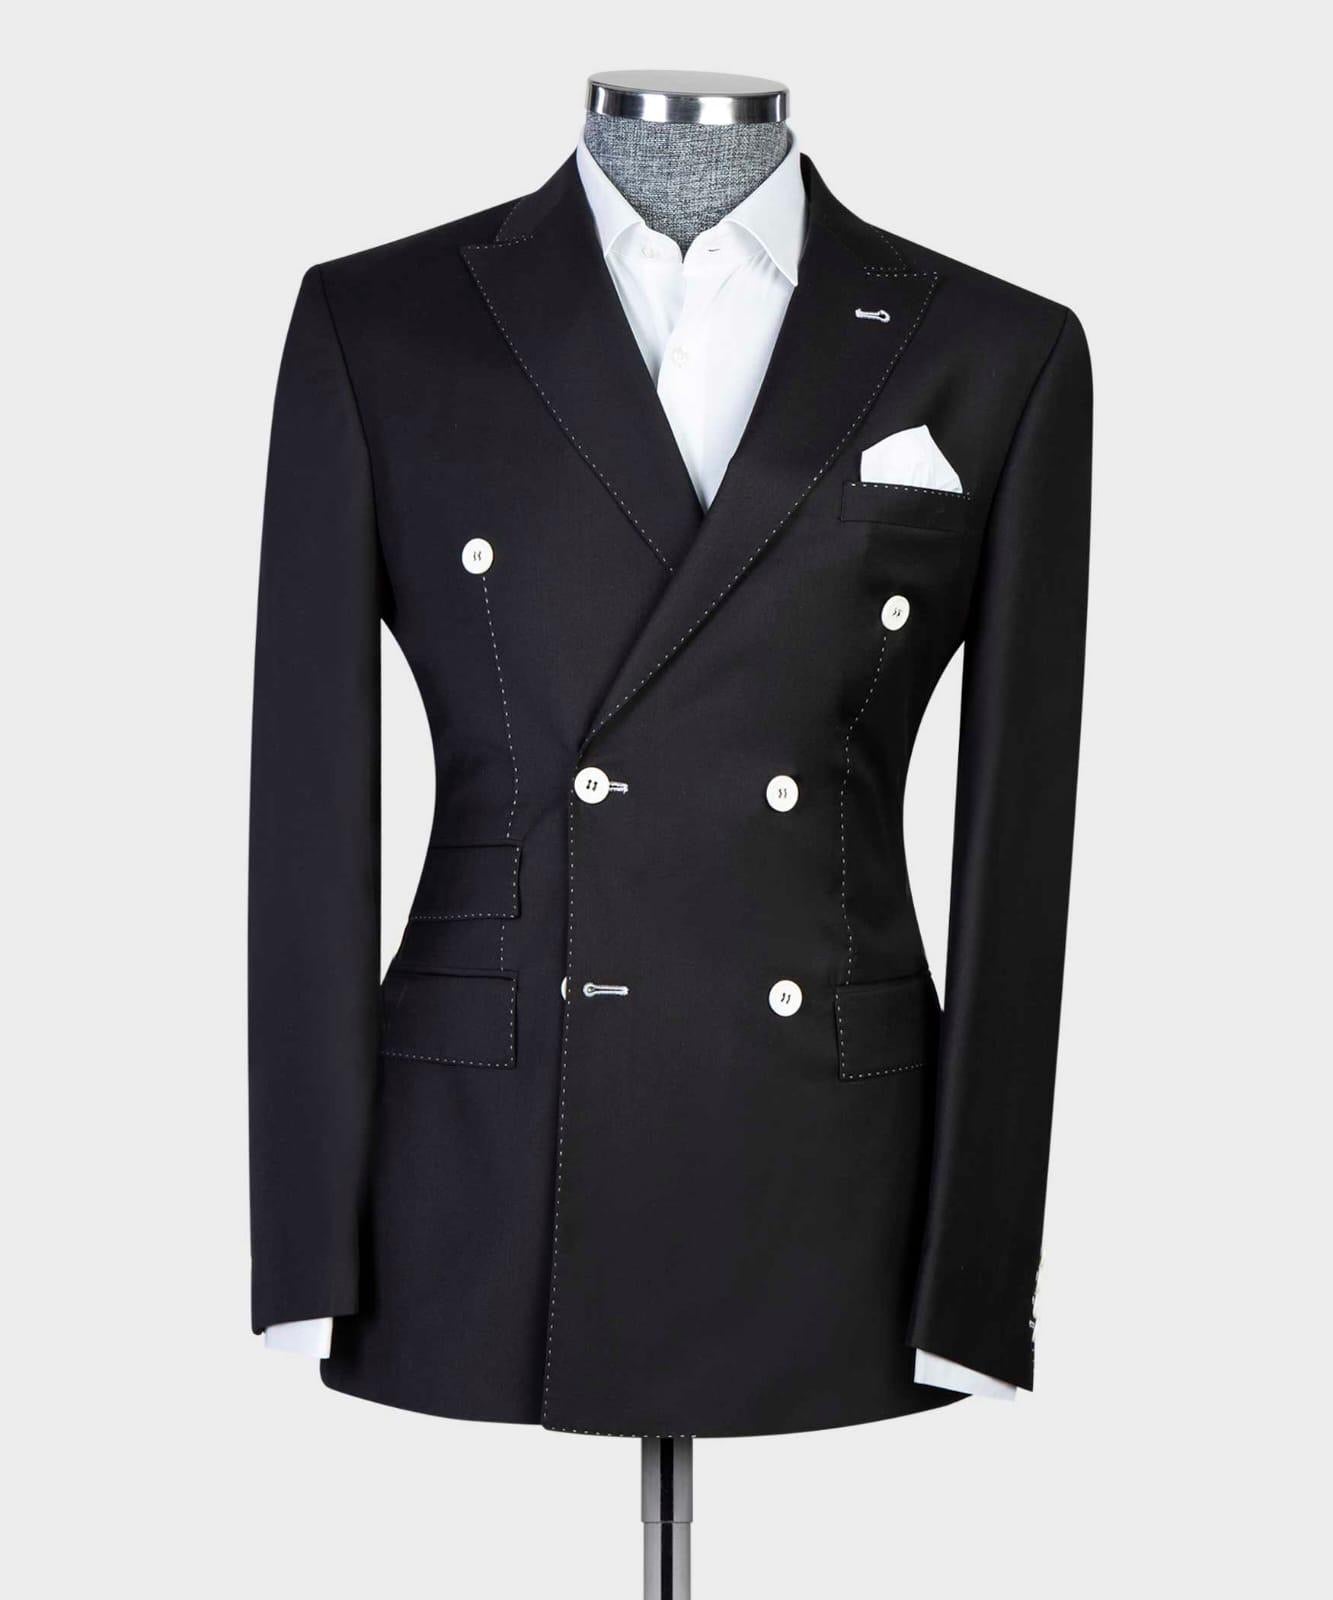 Men's Fashion Suits - Special Offer